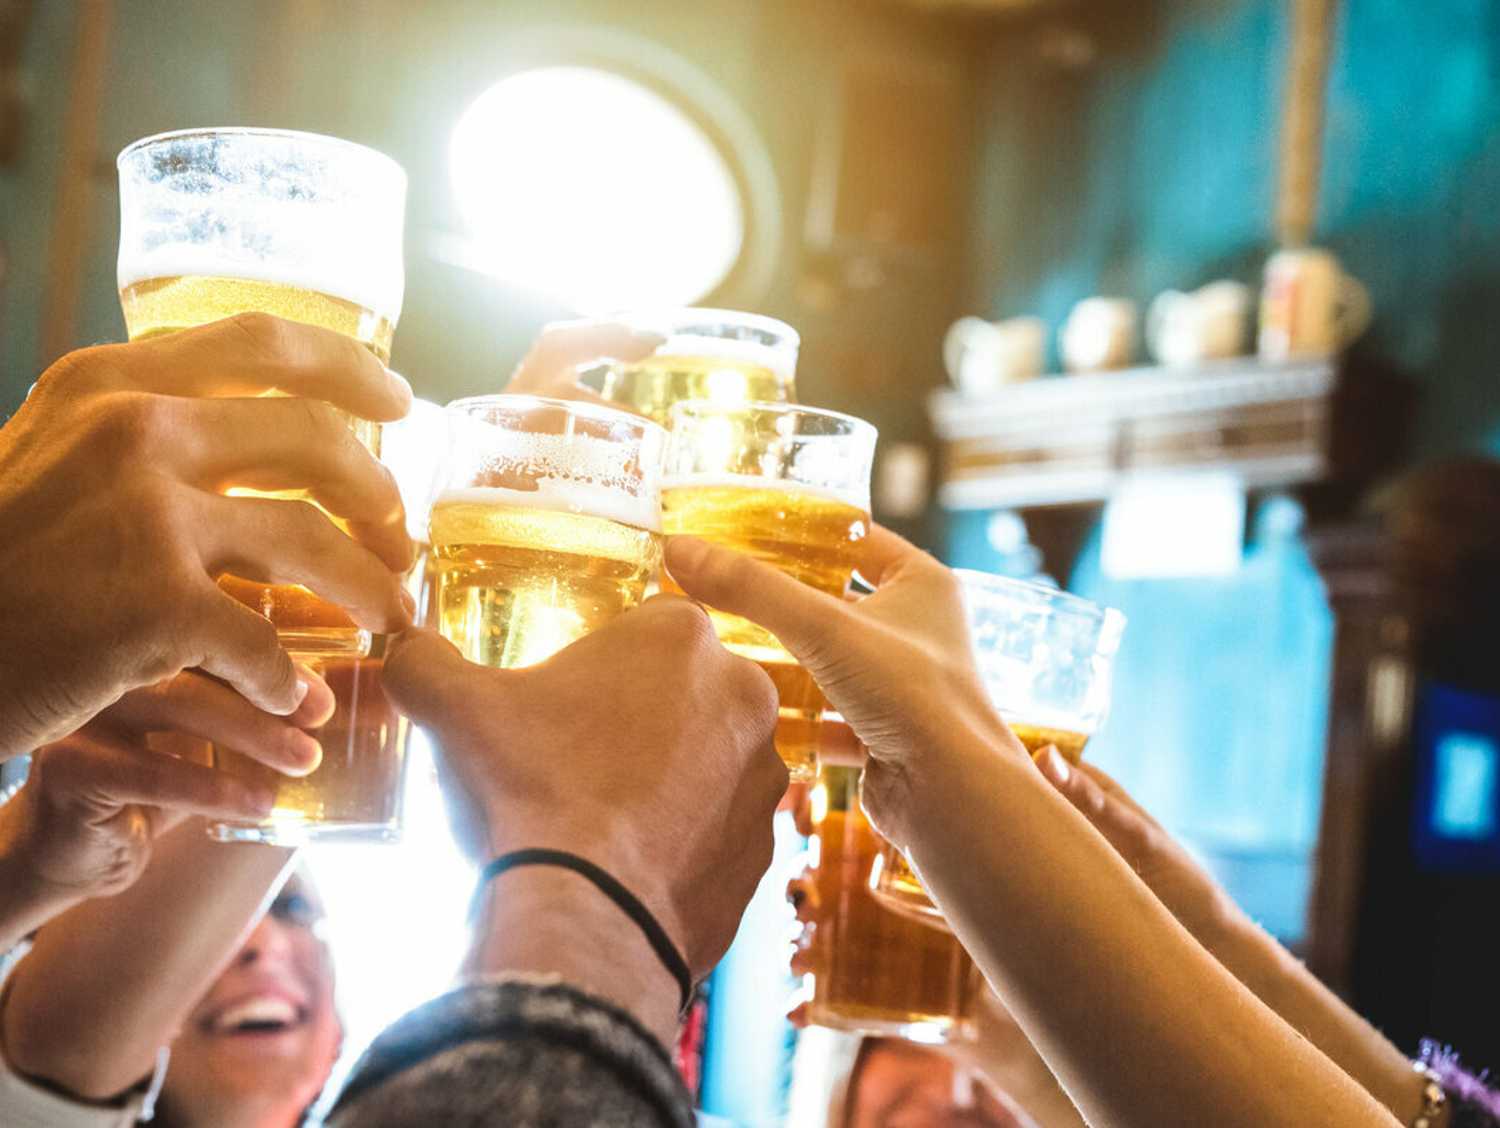 How Are Millennial Drinking Habits Affecting Companies?